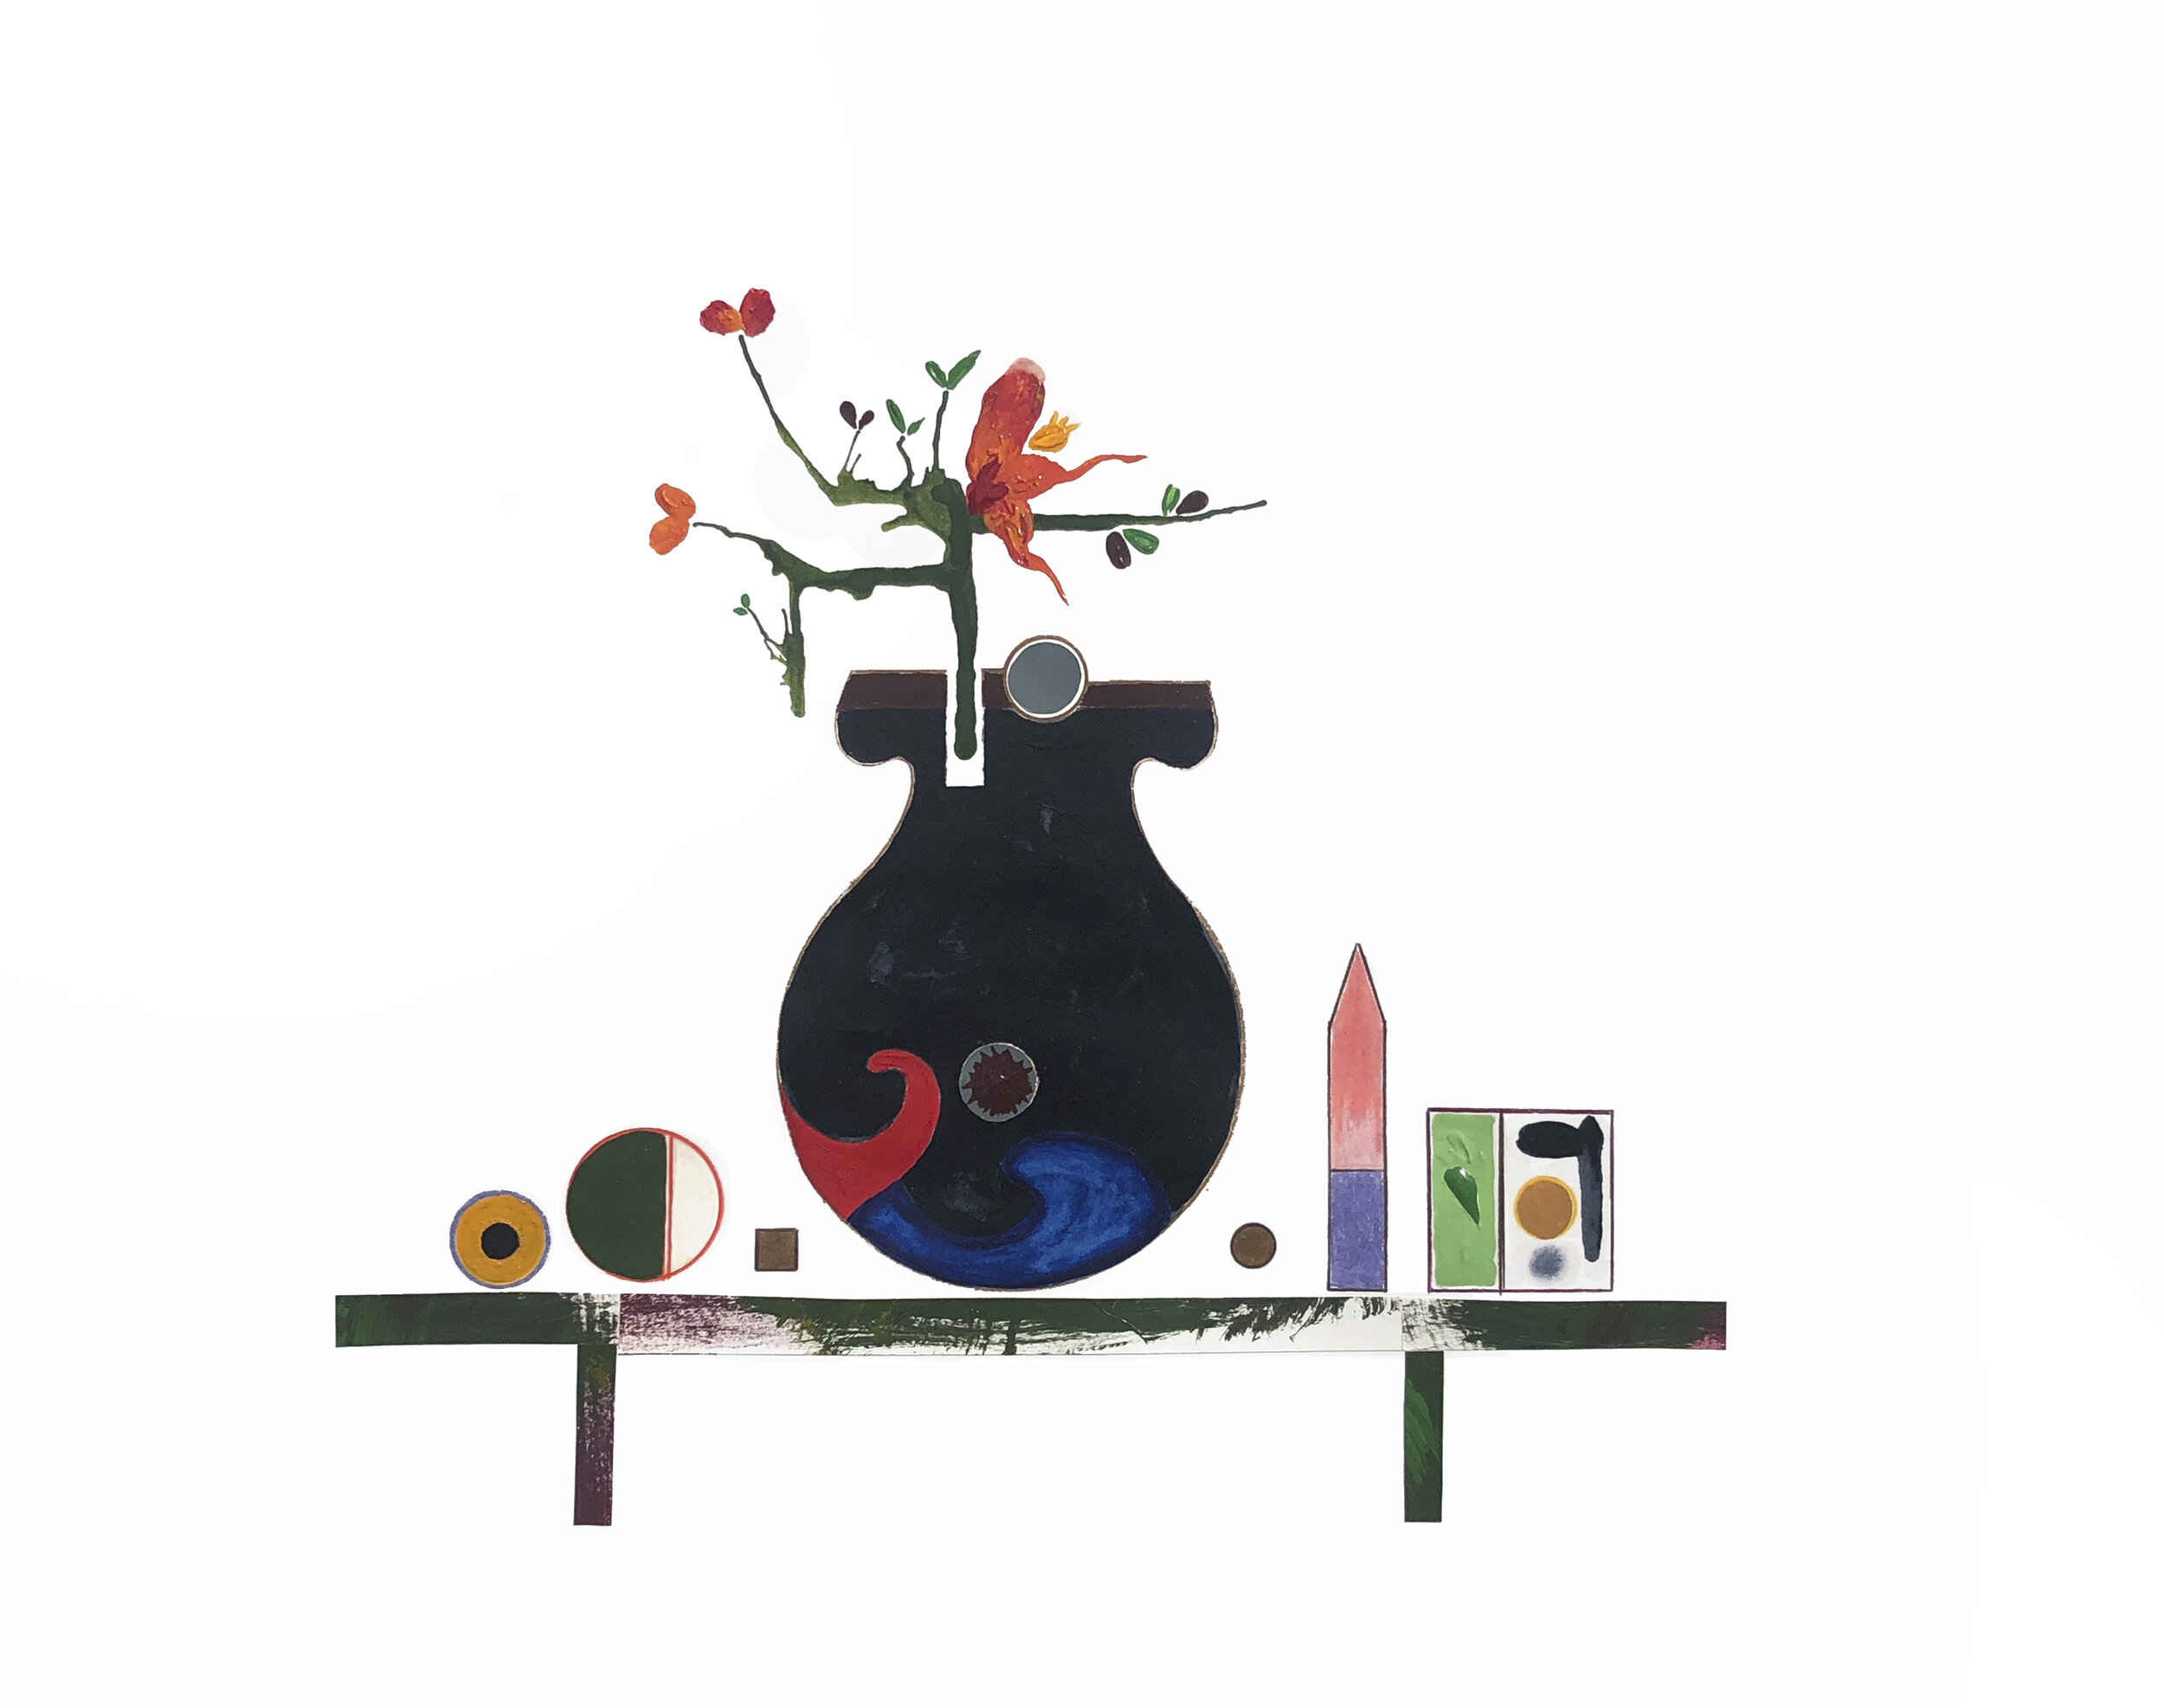    Green table with Black, Red, and Blue Vase + Exotic Bloom  , 2016  Mixed media on paper  18 x 24 in. 